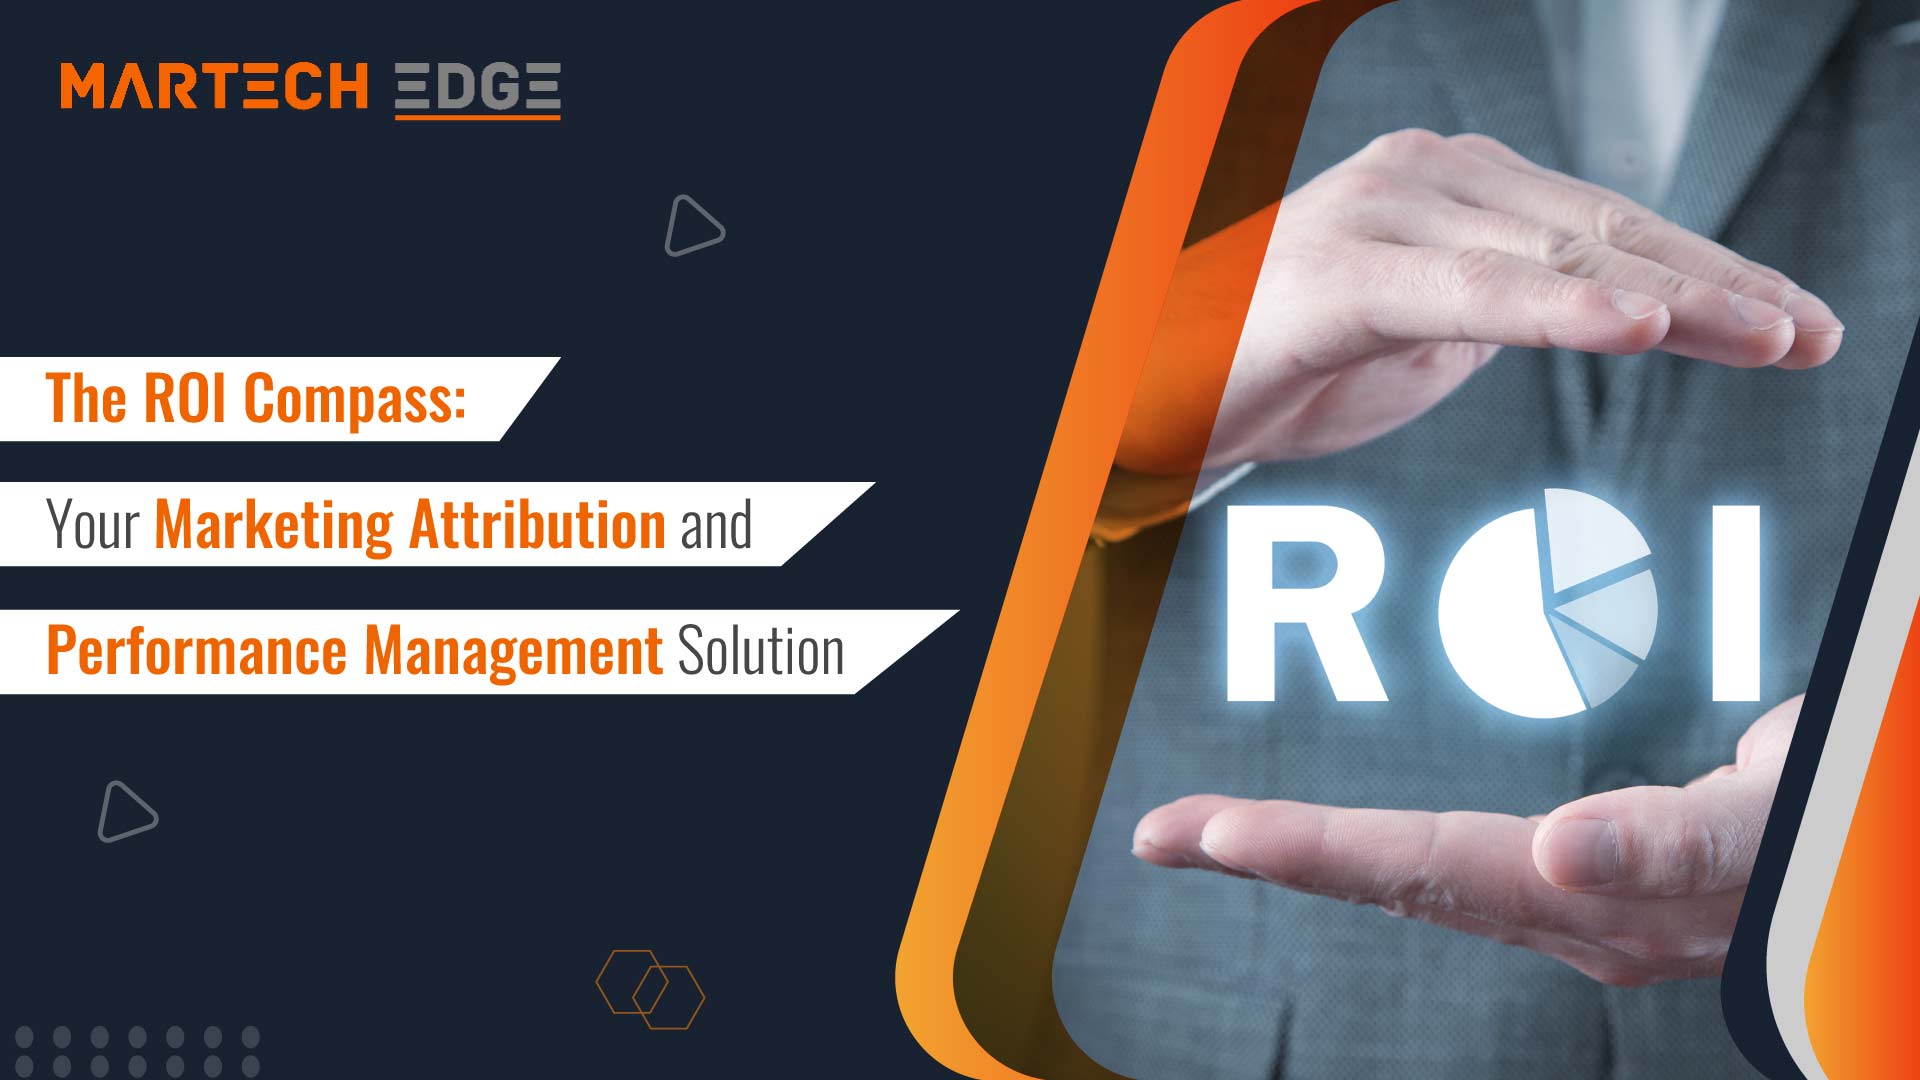 The ROI Compass: Your Marketing Attribution and Performance Management Solution  